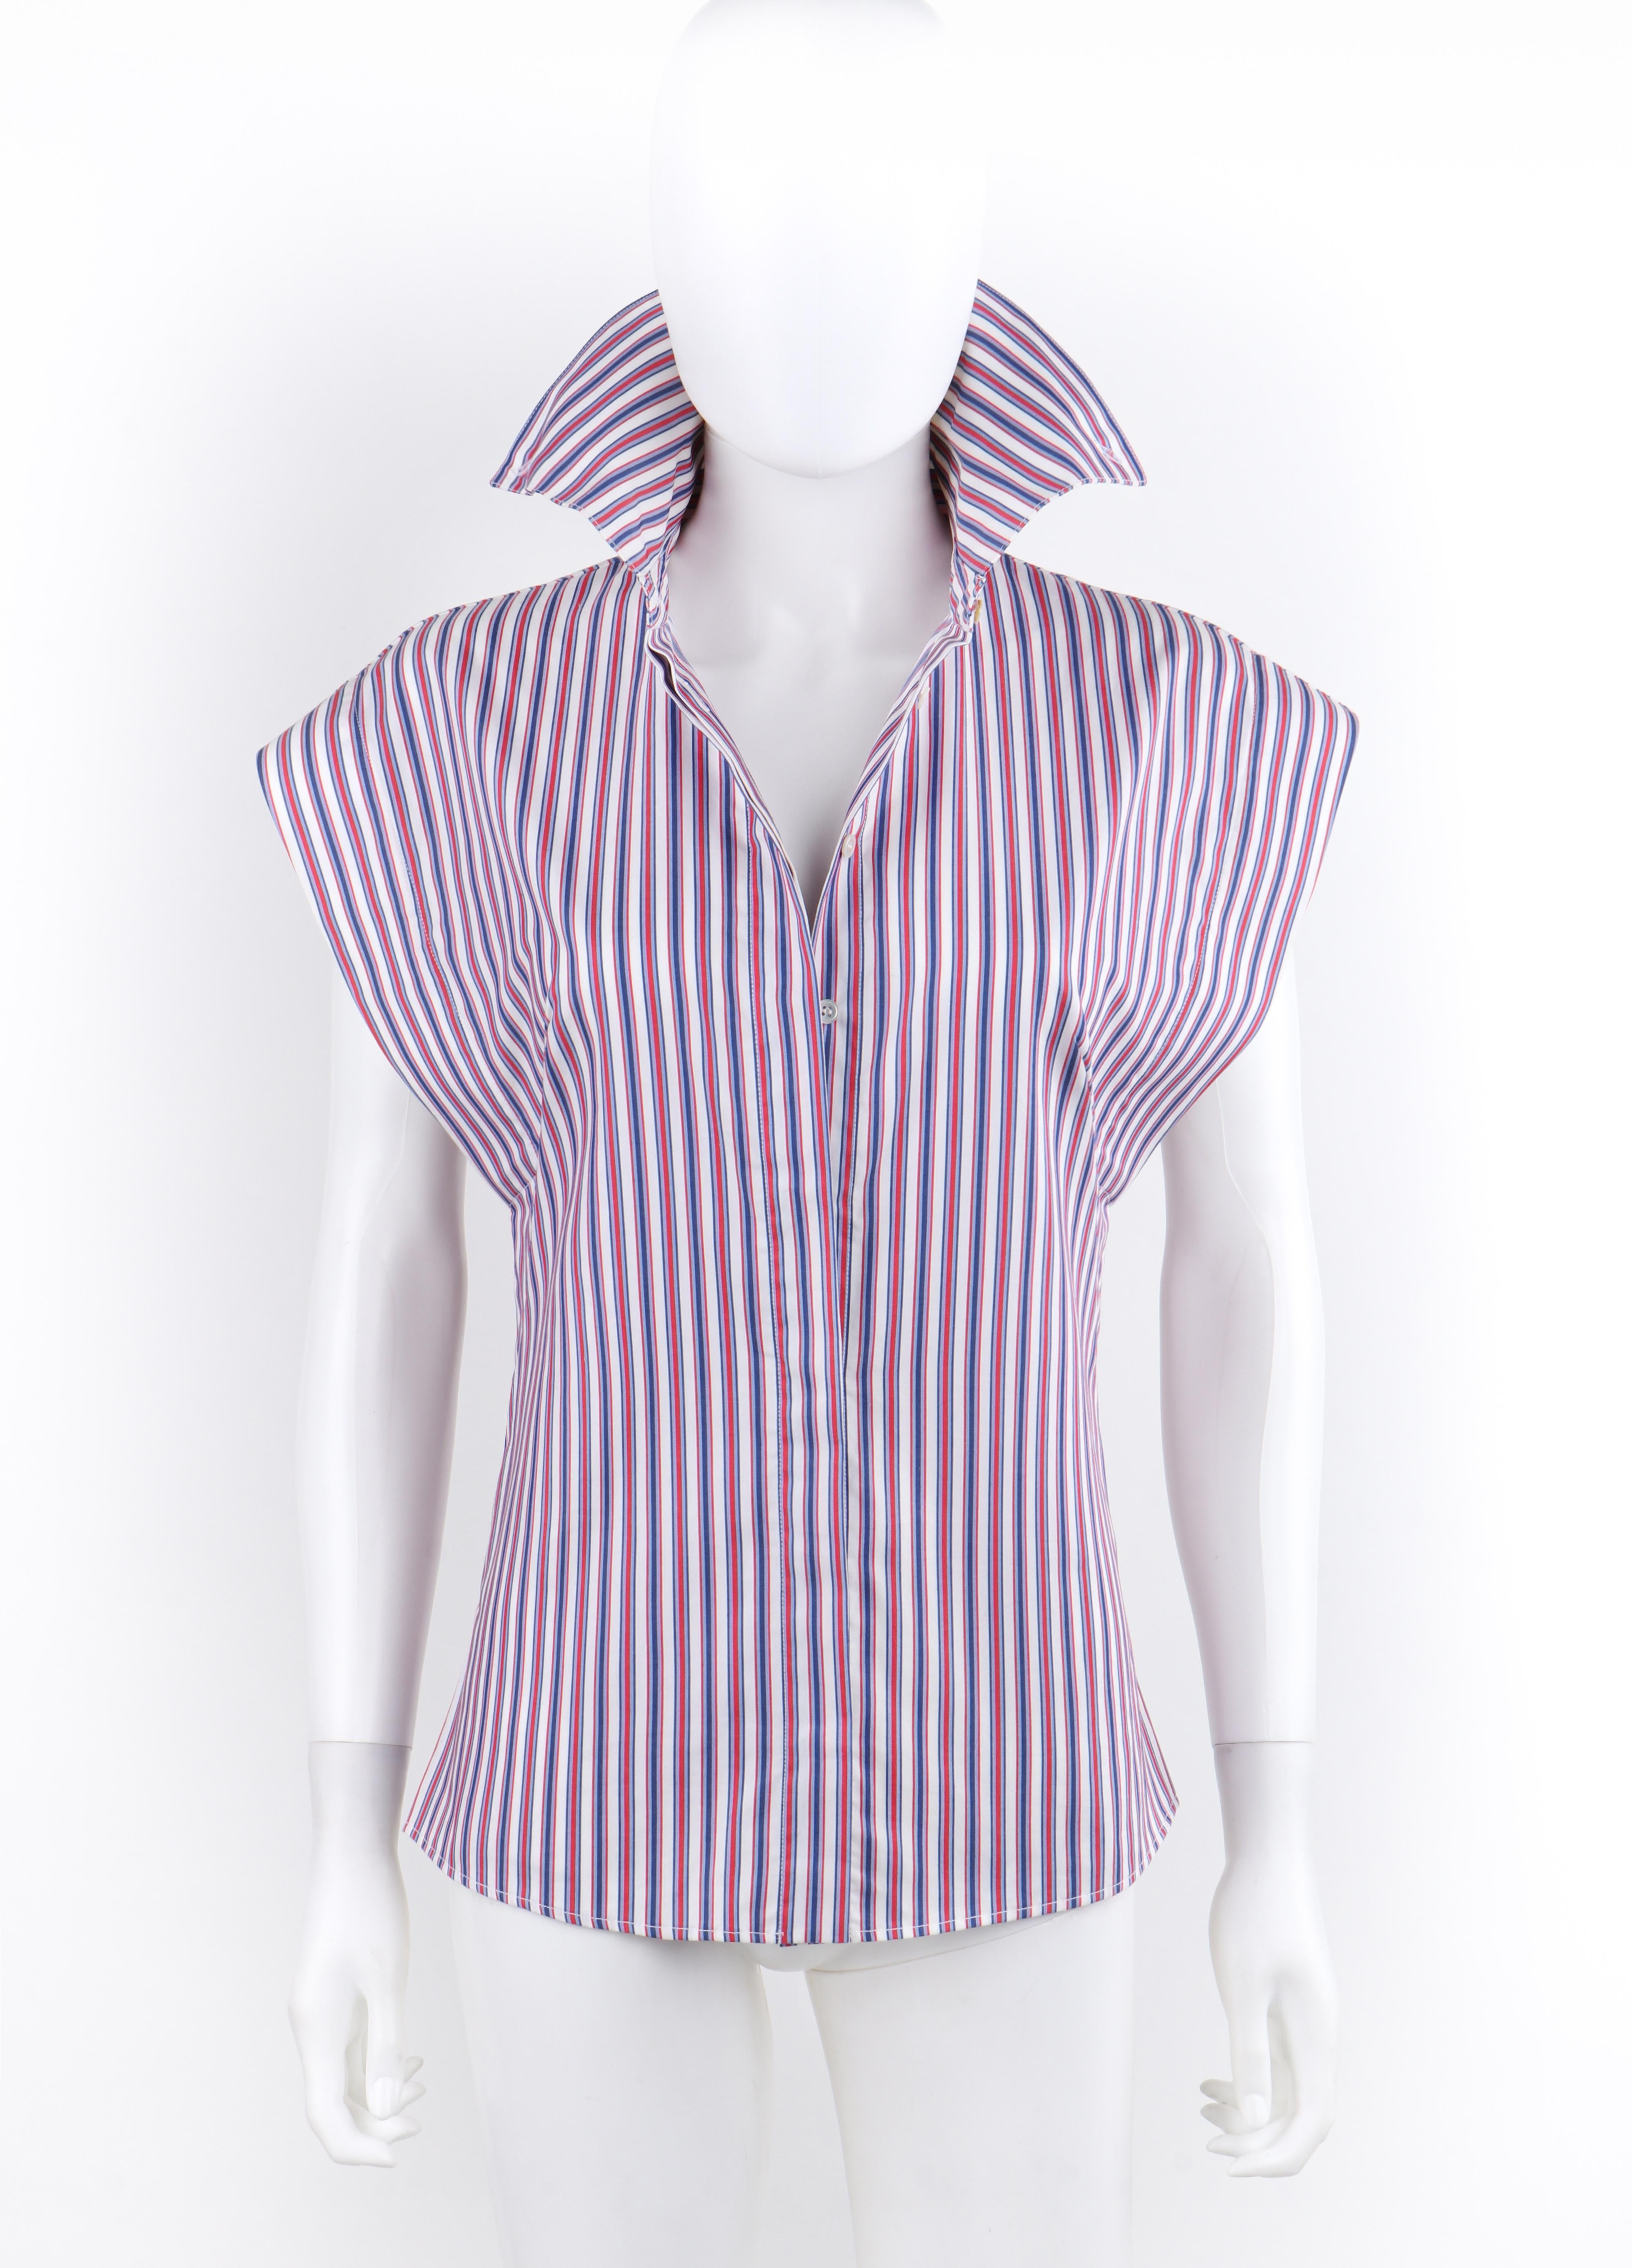 ALEXANDER McQUEEN Resort 2010 Red White Blue High Neck Button Down Blouse Top In Good Condition For Sale In Thiensville, WI